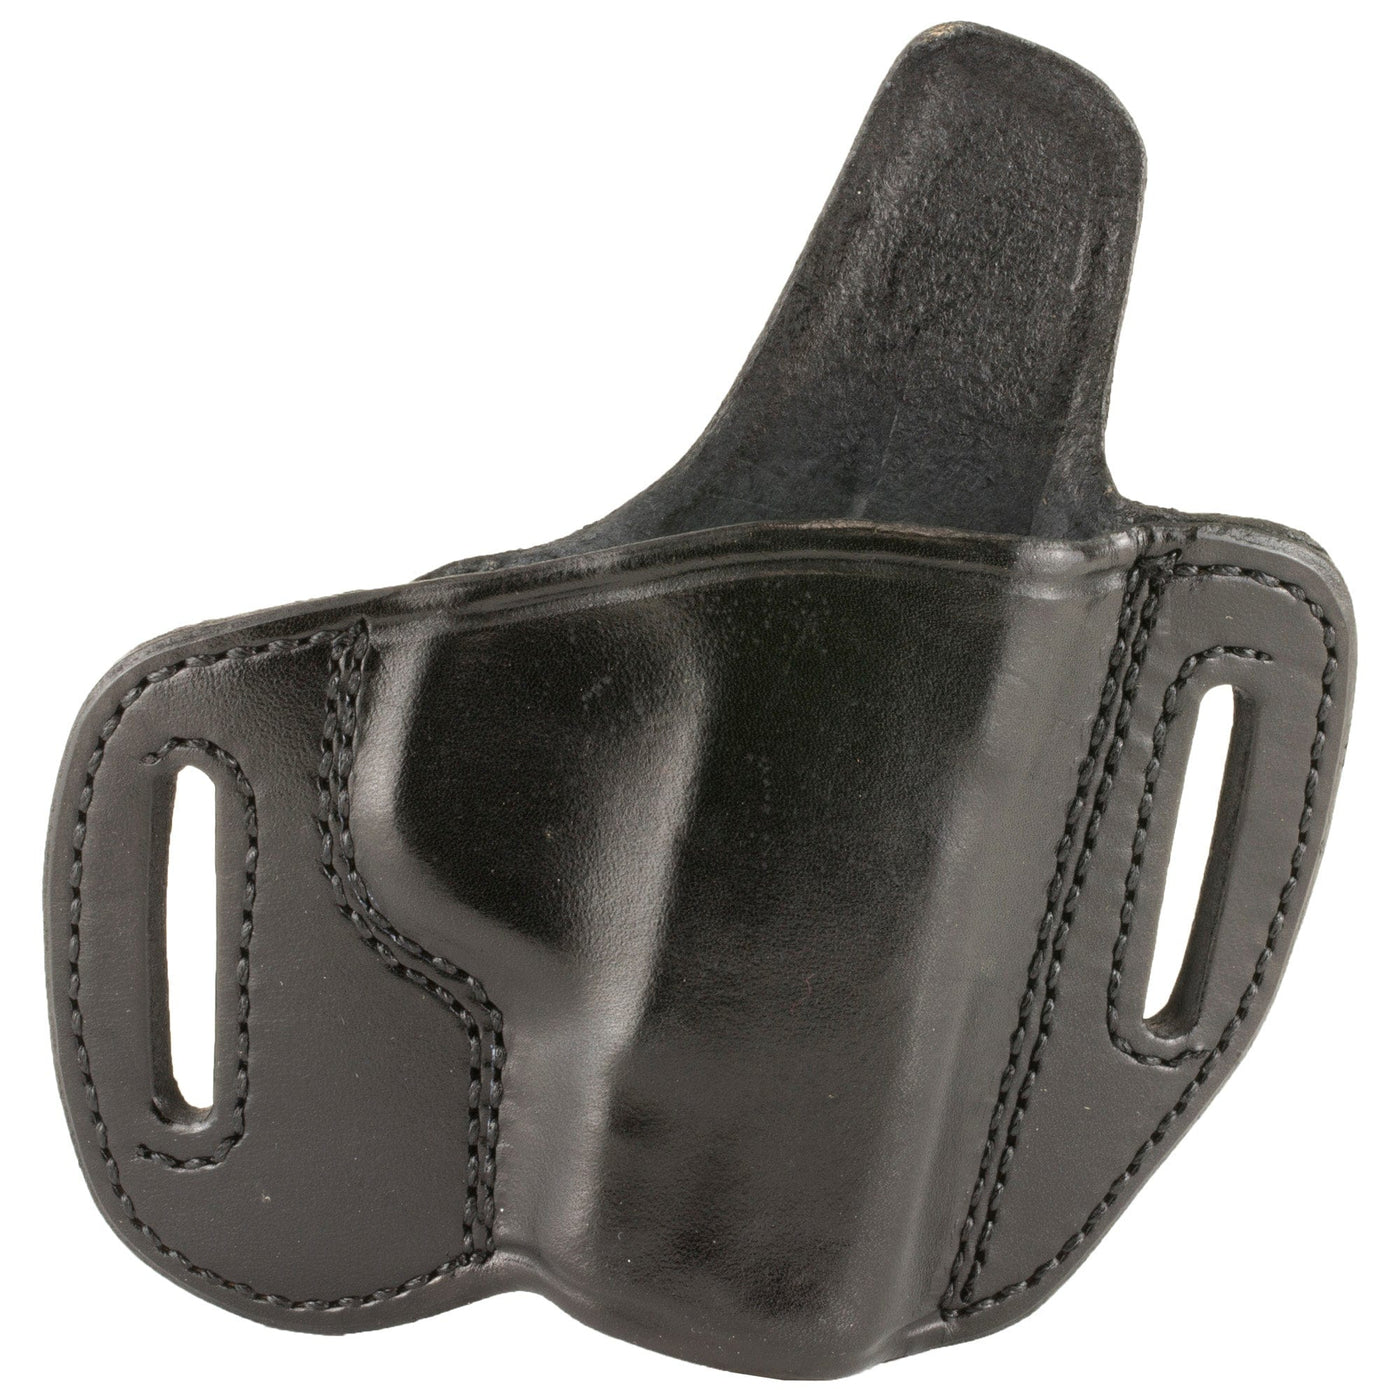 Don Hume D Hume 721 Ot Sw Shield Rh Blk Holsters